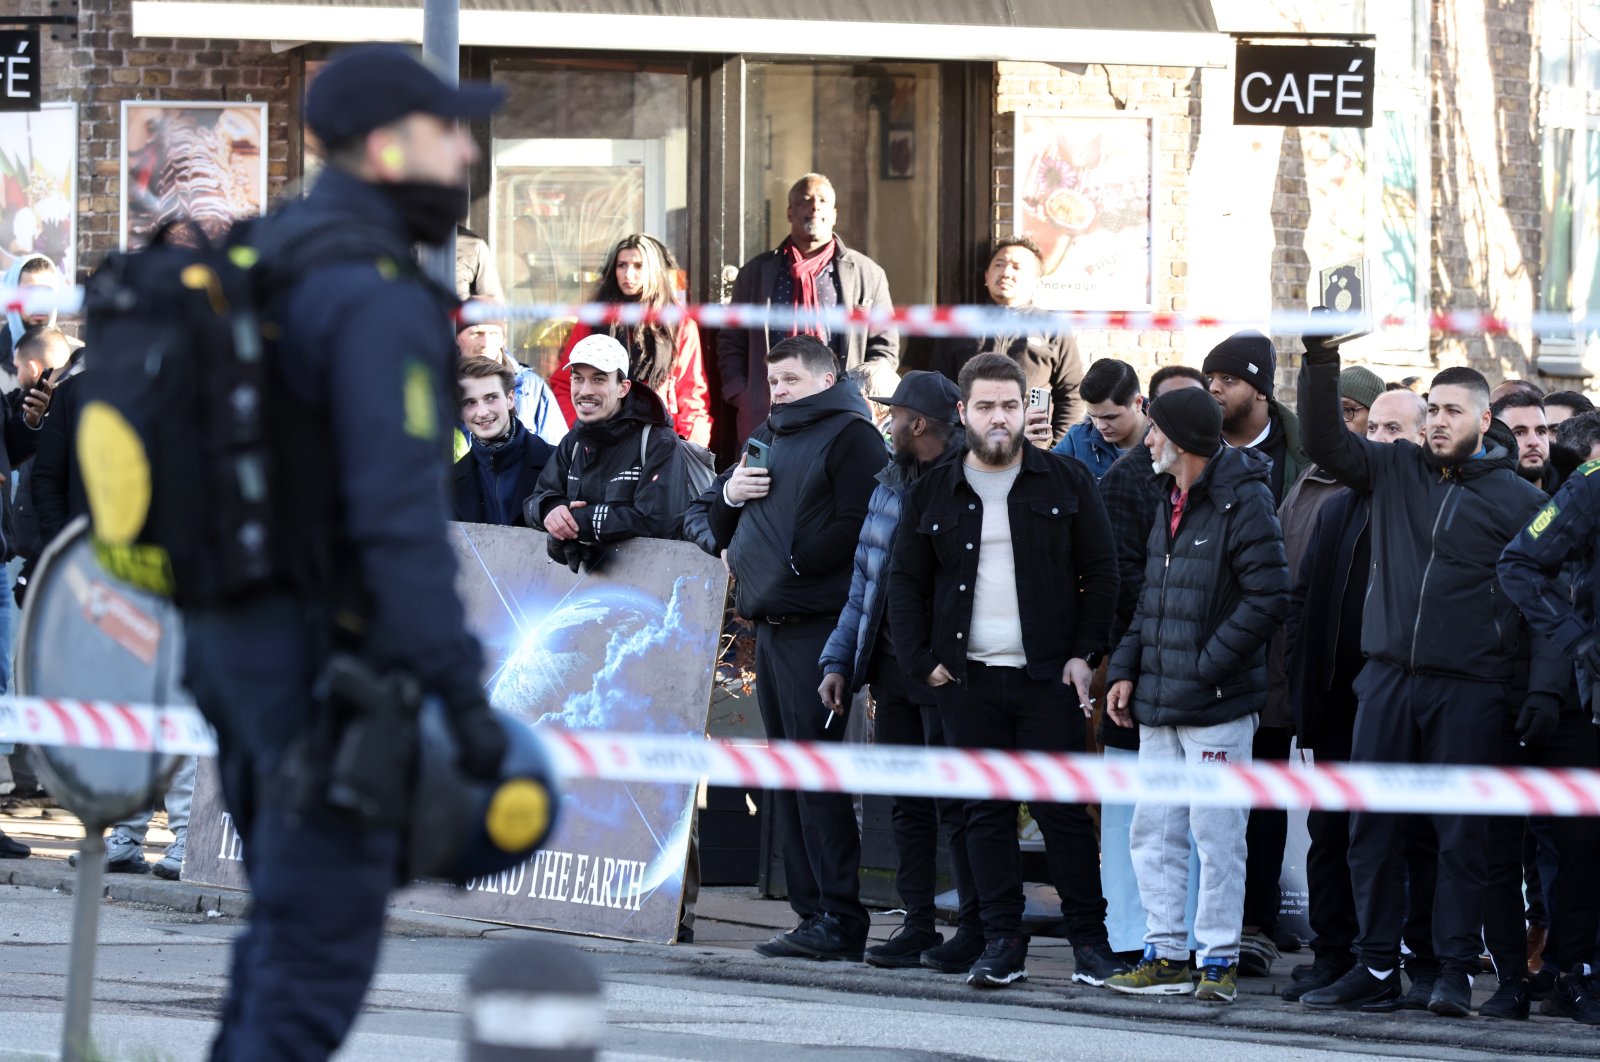 Police patrol the area in front of a mosque at Noerrebro after Danish far-right politician Rasmus Paludan announced he would burn a copy of the Quran, Copenhagen, Denmark, Jan. 27, 2023. (EPA Photo)